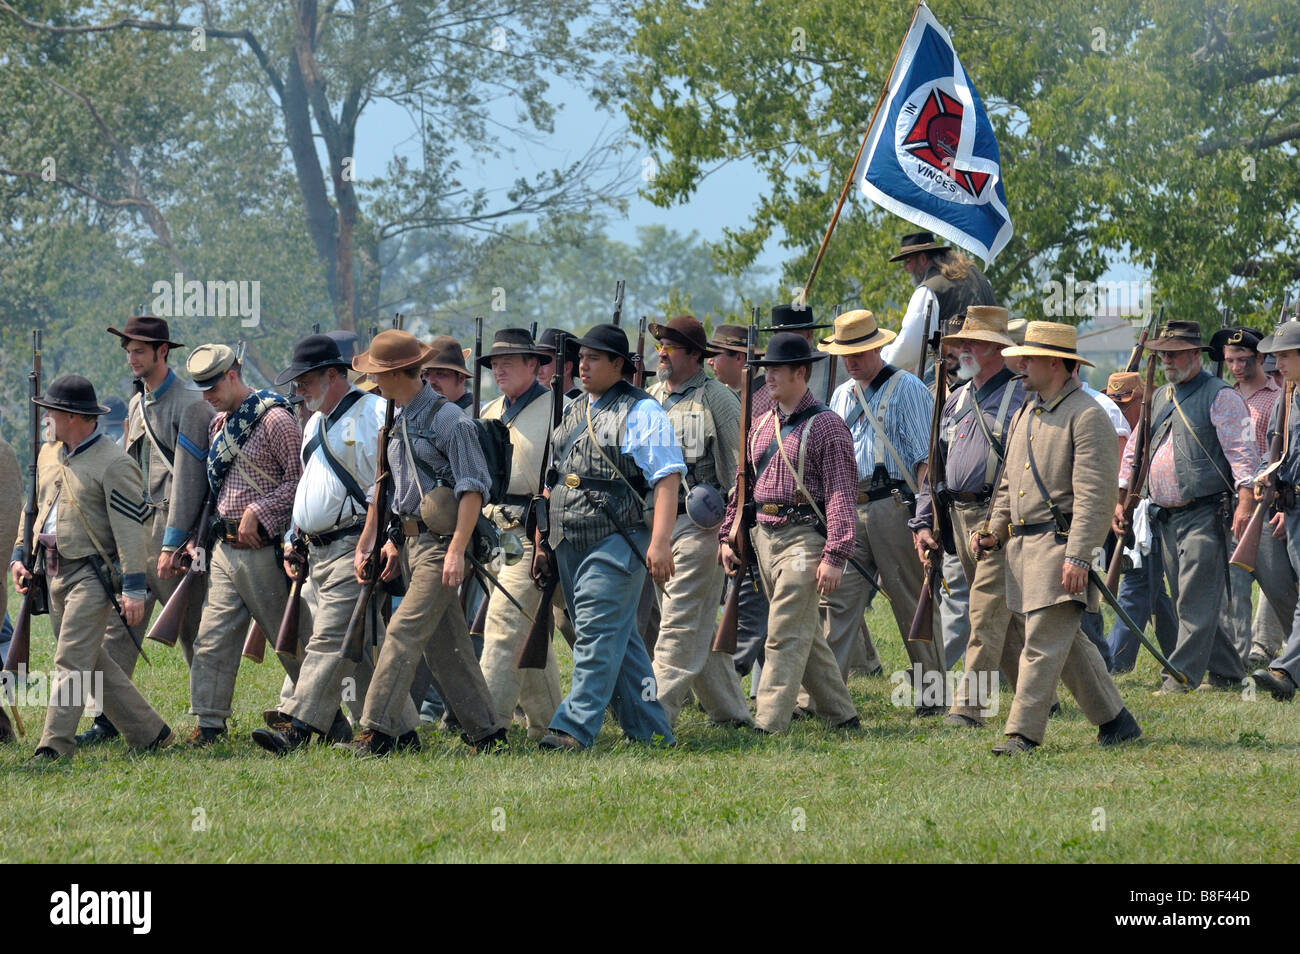 Confederate troops marching at the Reenactment of the 1862 American Civil War Battle of Richmond Kentucky Stock Photo